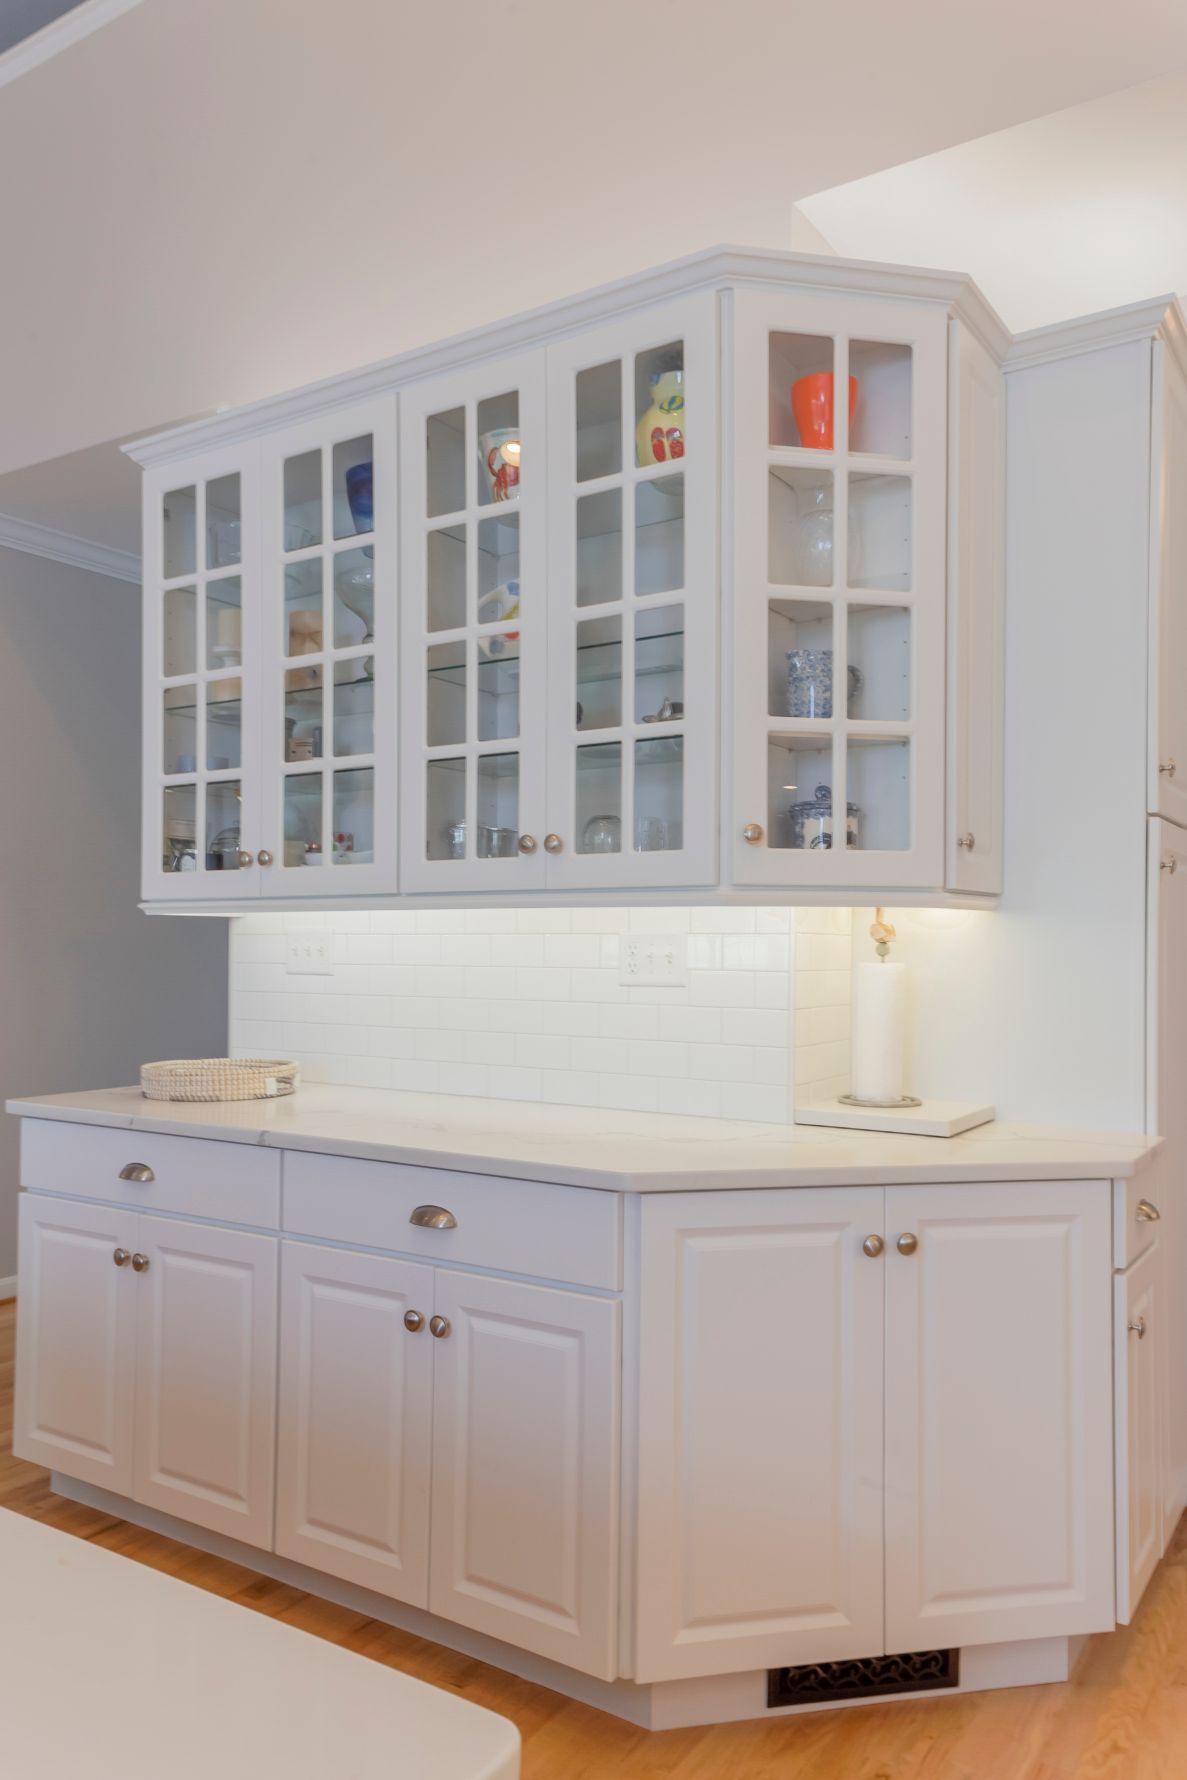 Kitchen Remodel in Willow Oak, Ocean View DE with White Cabinets and White Subway Backsplash Tiles